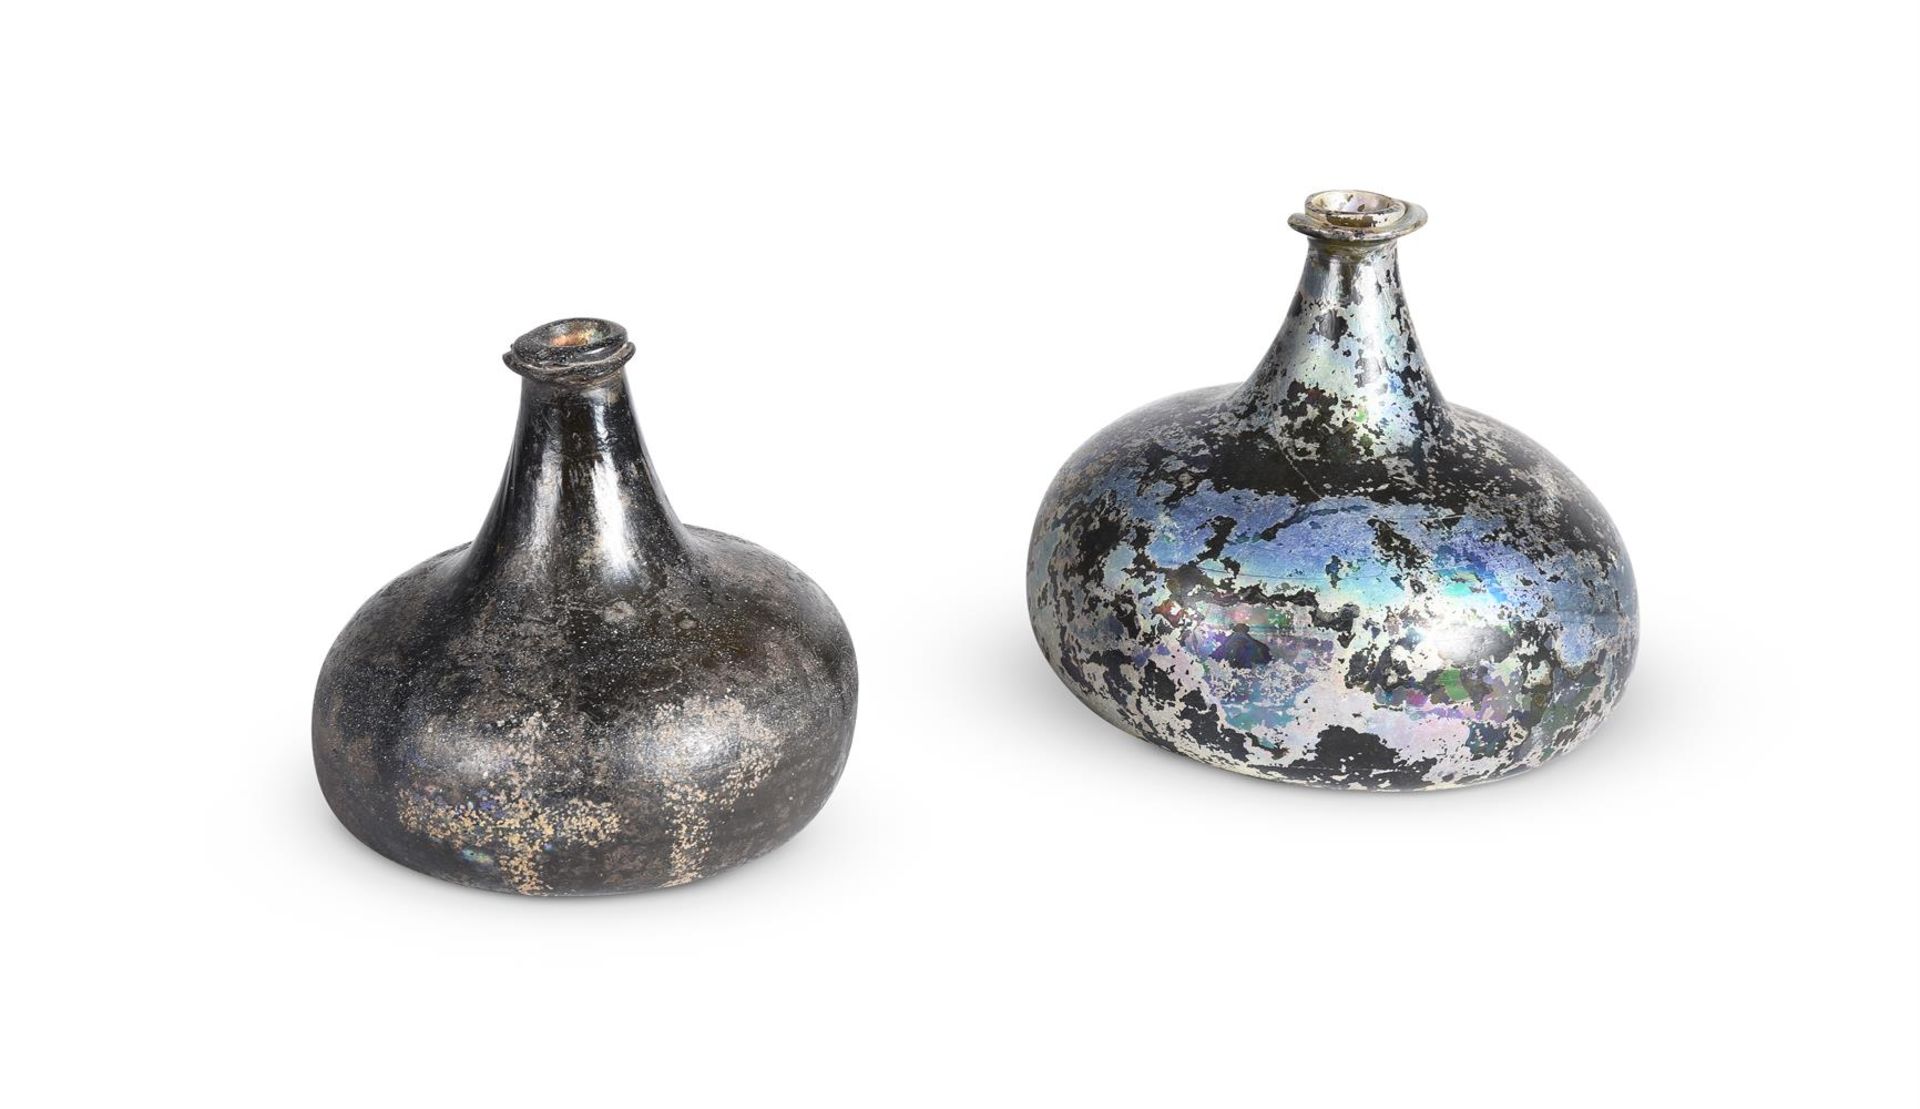 TWO 'ONION' SHAPE WINE BOTTLES, ENGLISH, EARLY 18TH CENTURY